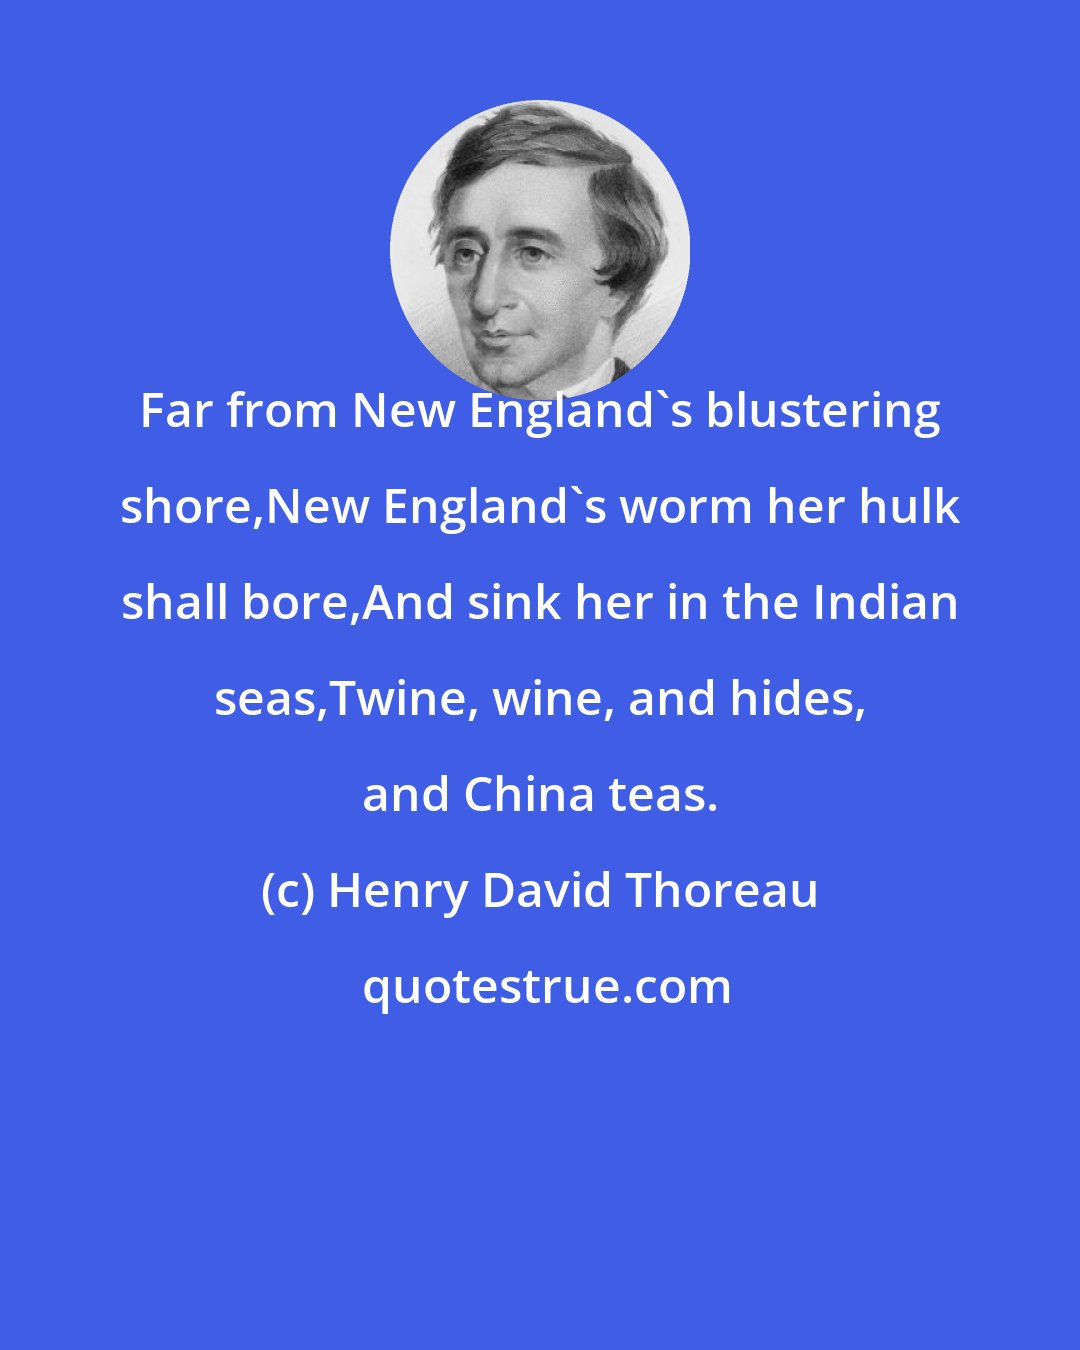 Henry David Thoreau: Far from New England's blustering shore,New England's worm her hulk shall bore,And sink her in the Indian seas,Twine, wine, and hides, and China teas.